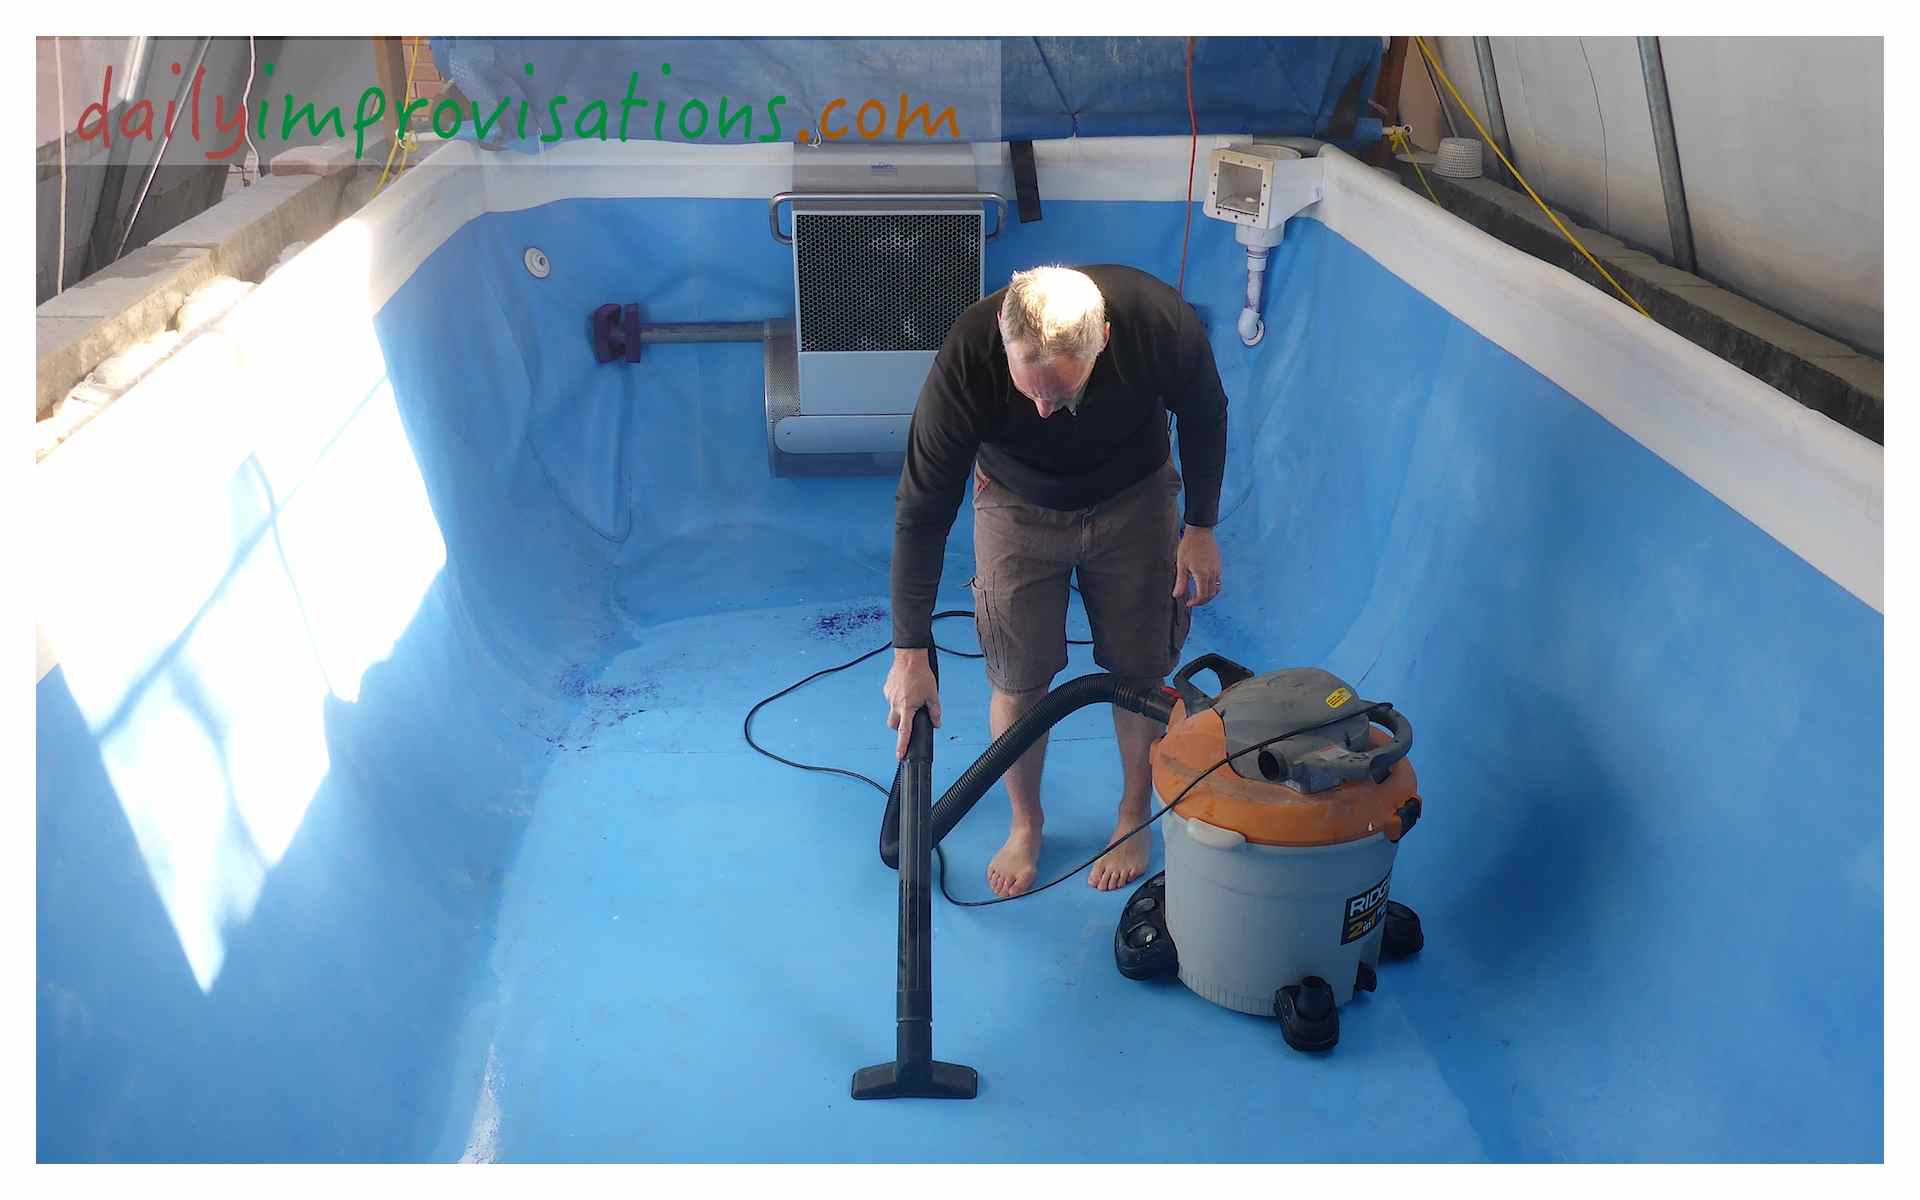 Using Shop Vac To Clean Pool